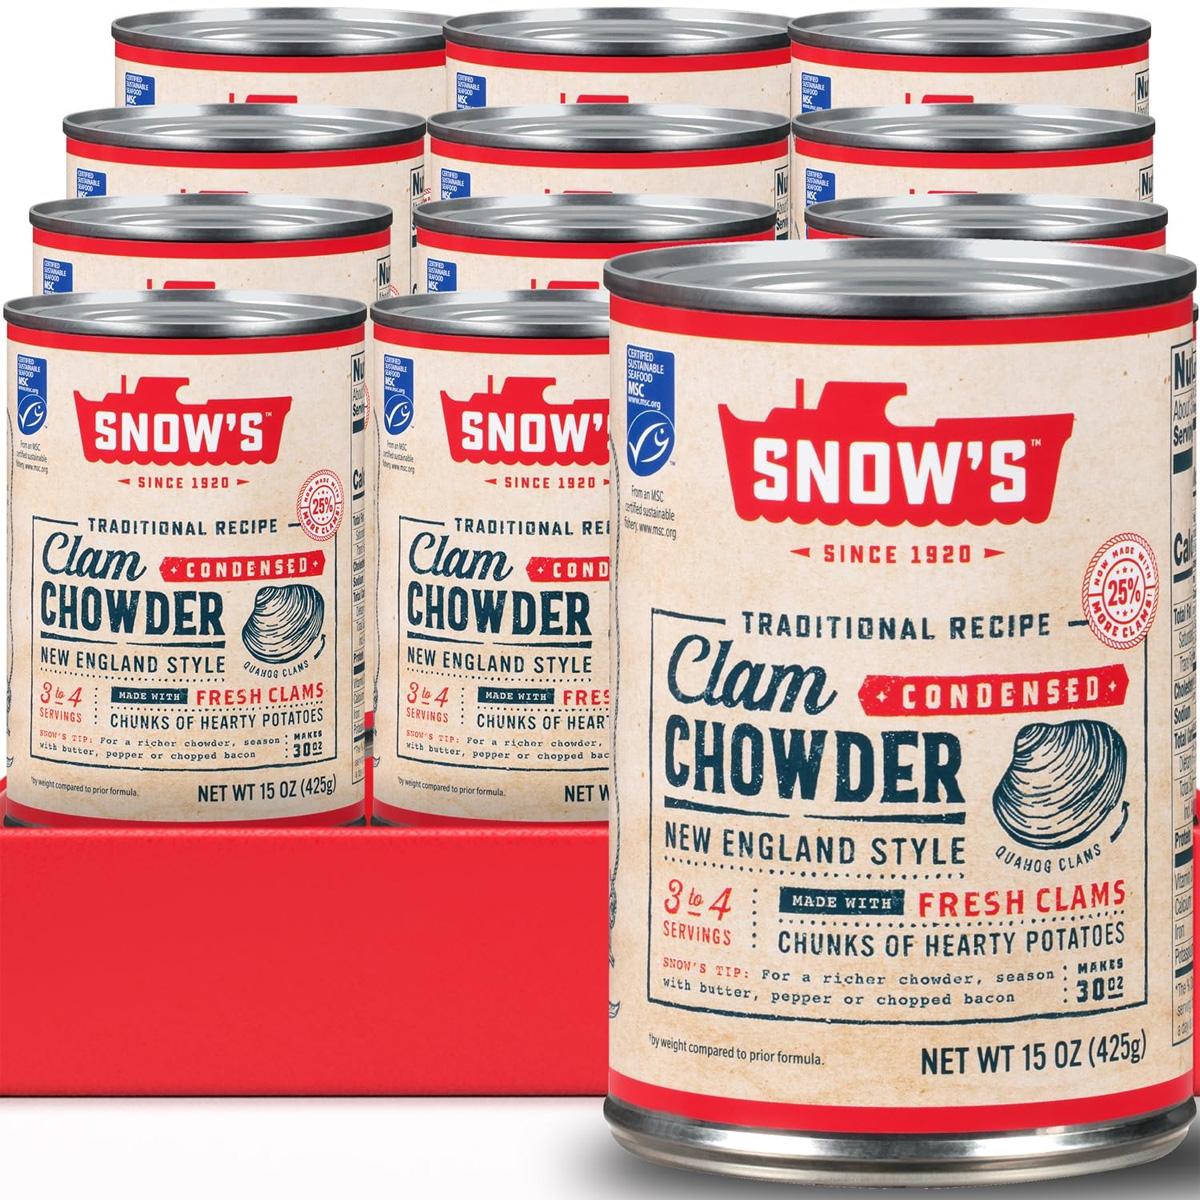 Snows Condensed New England Clam Chowder 12 Pack for $19.97